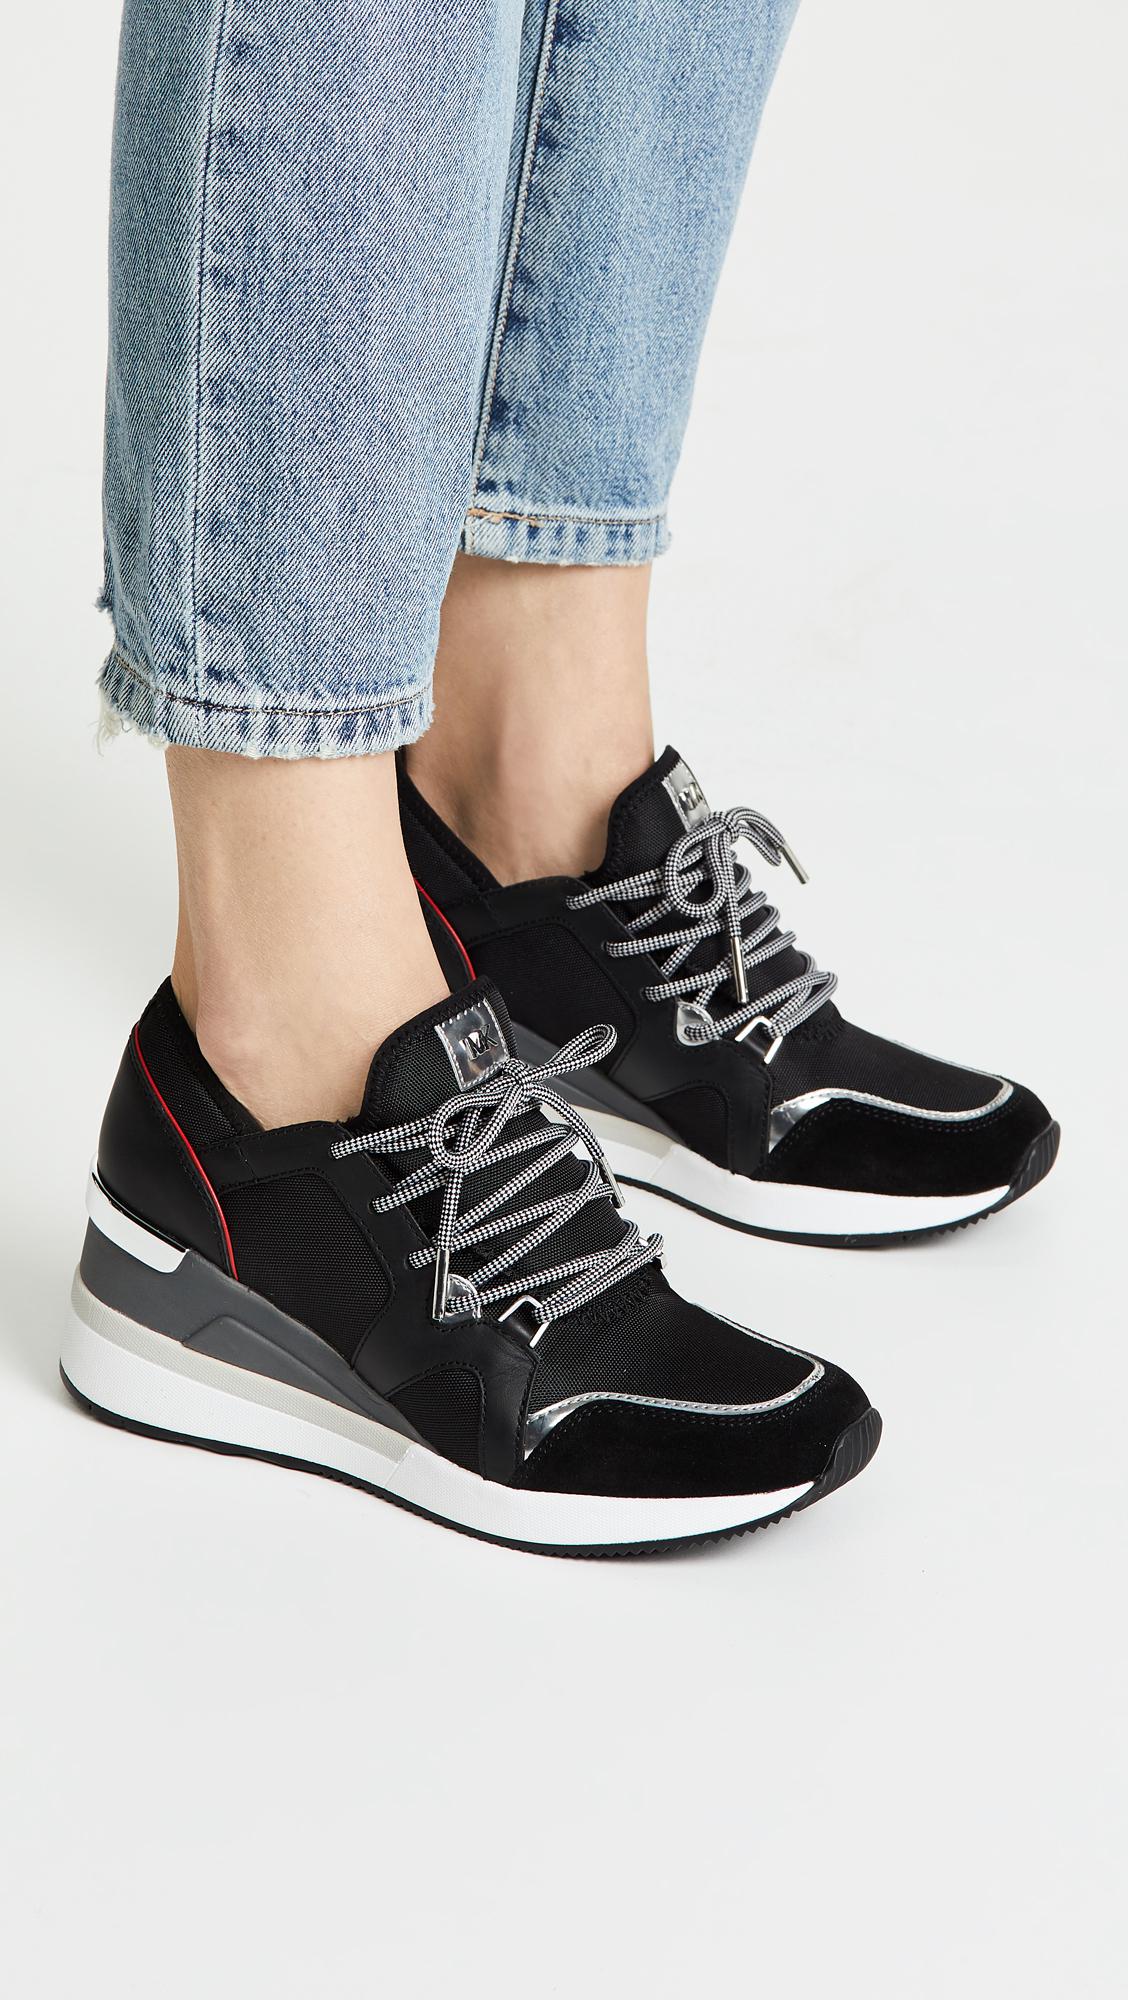 Michael Kors Liv Trainer Sneakers Hotsell, SAVE 44% - aveclumiere.com